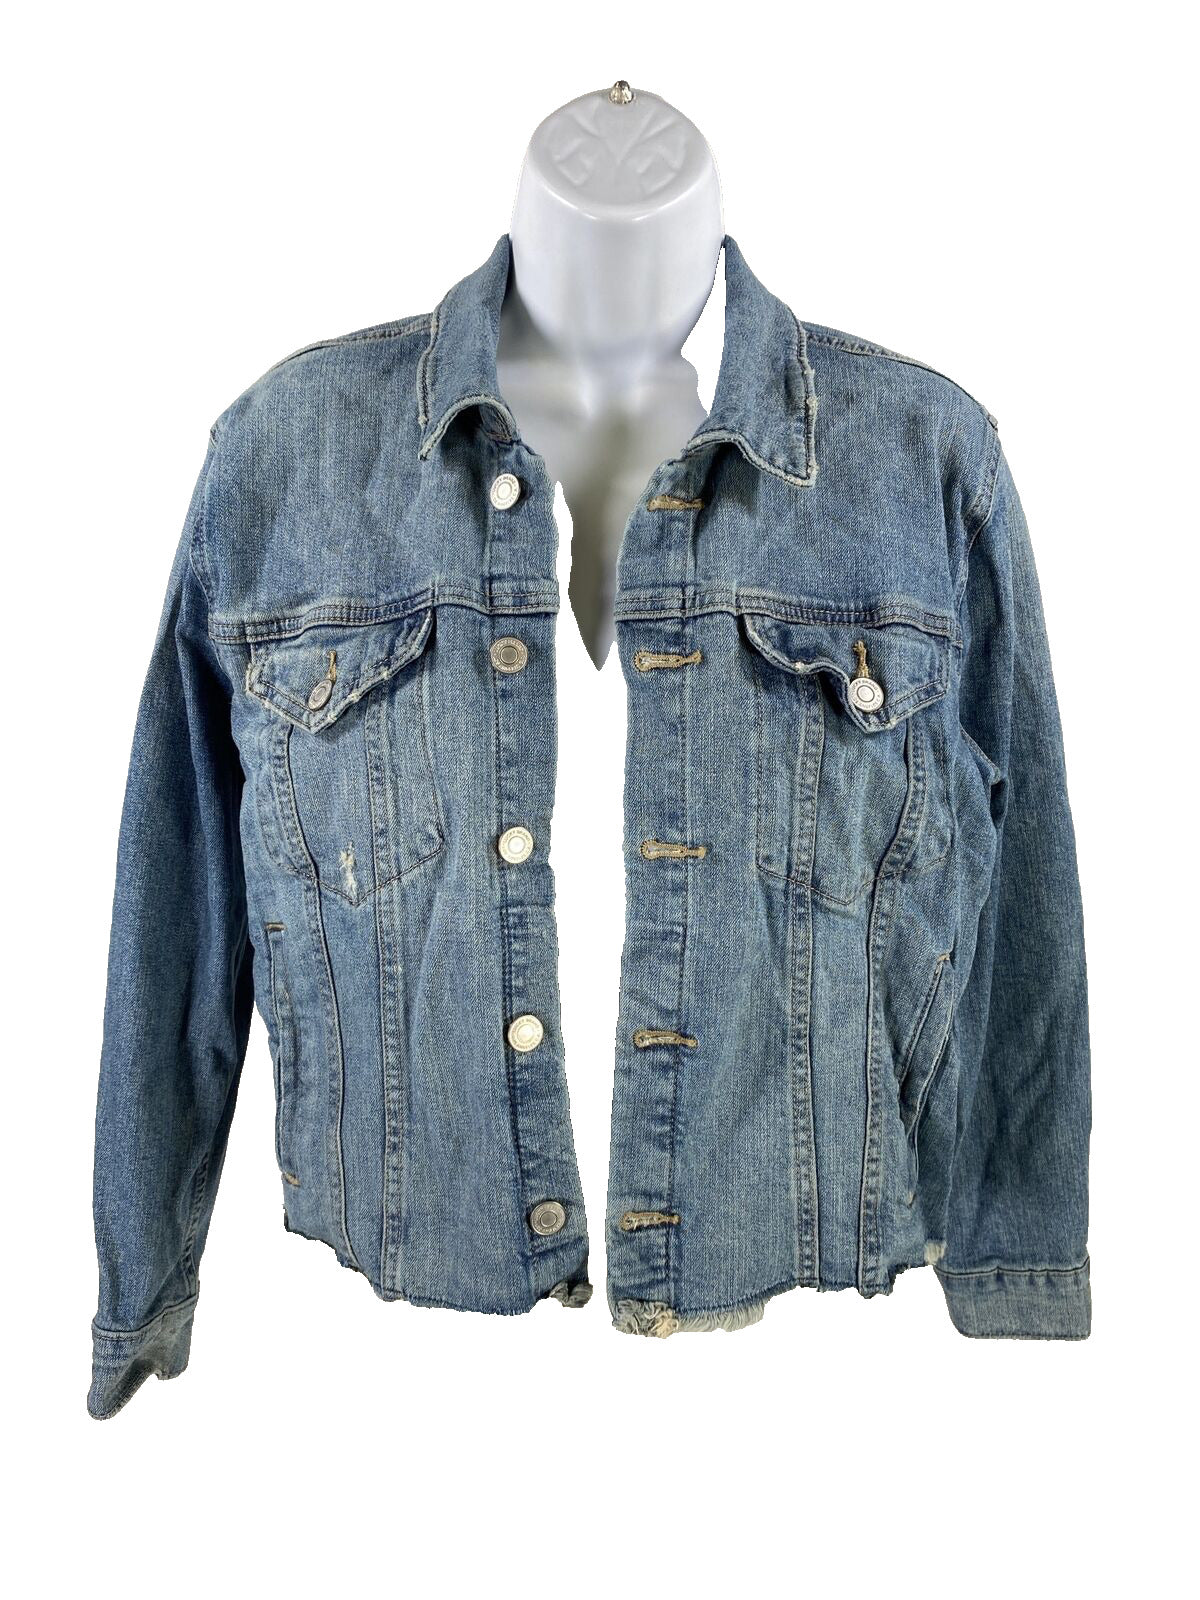 Lucky Brand Women's Light Wash Button Up Denim Jean Jacket - M – The Resell  Club